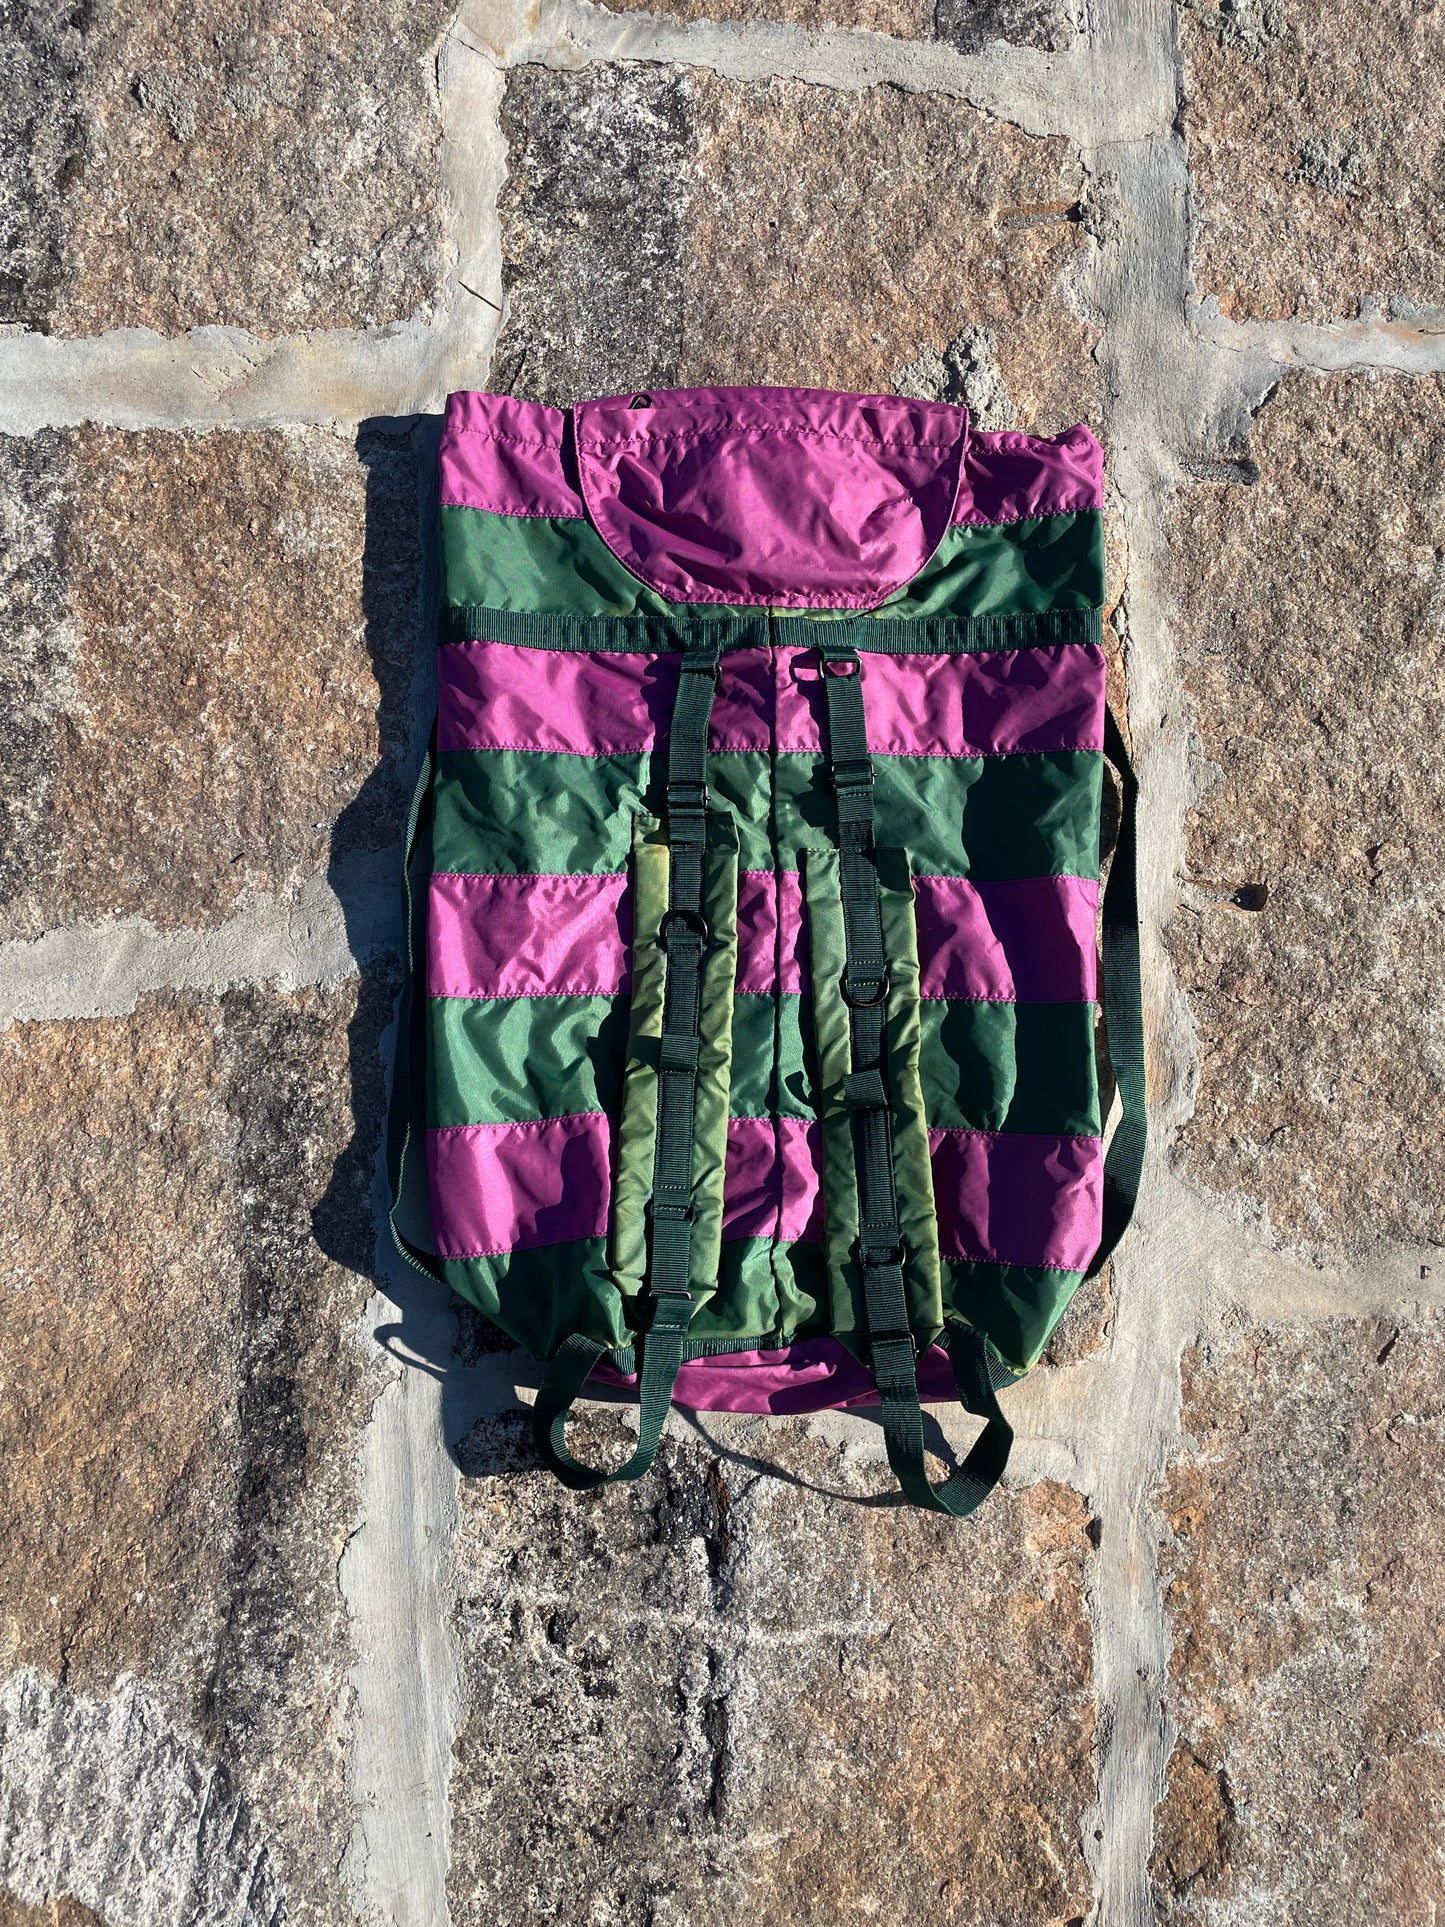 SS05 “But Beautiful ll” - Undercover Pinstripe Nylon Camper Bag